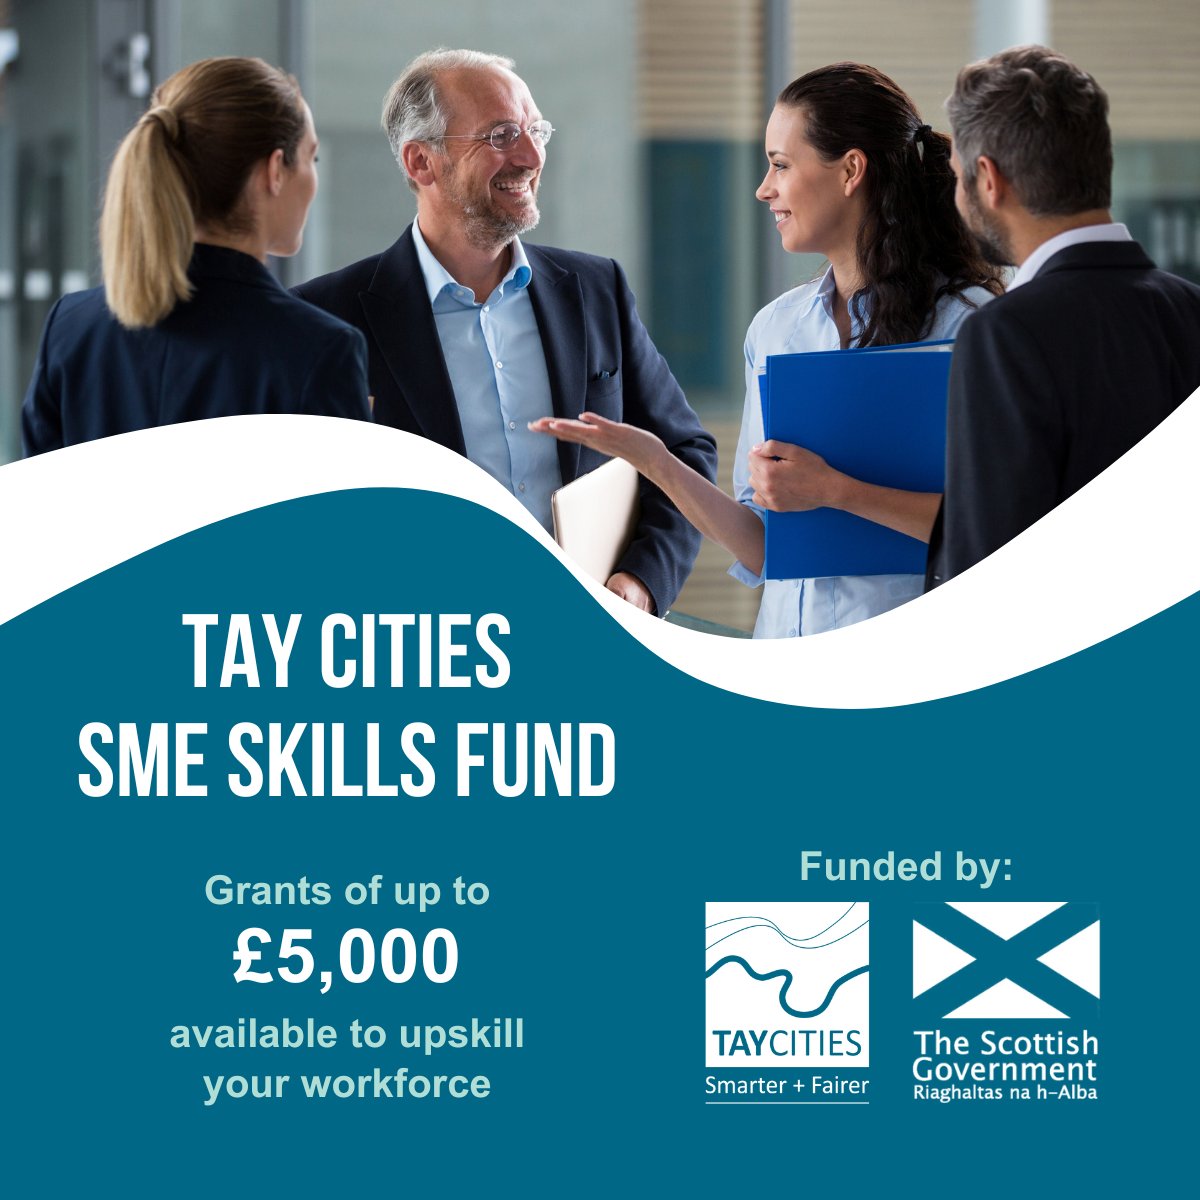 Seeking training solutions for your SME team but unsure where to begin? 🤔Access up to £5,000 funding through Tay Cities SME Skills Funds! 🙌 As an approved training provider, we can guide you through the process. Get in touch now! ⬇️ pulse.ly/zrdejn5gya #Upskilling